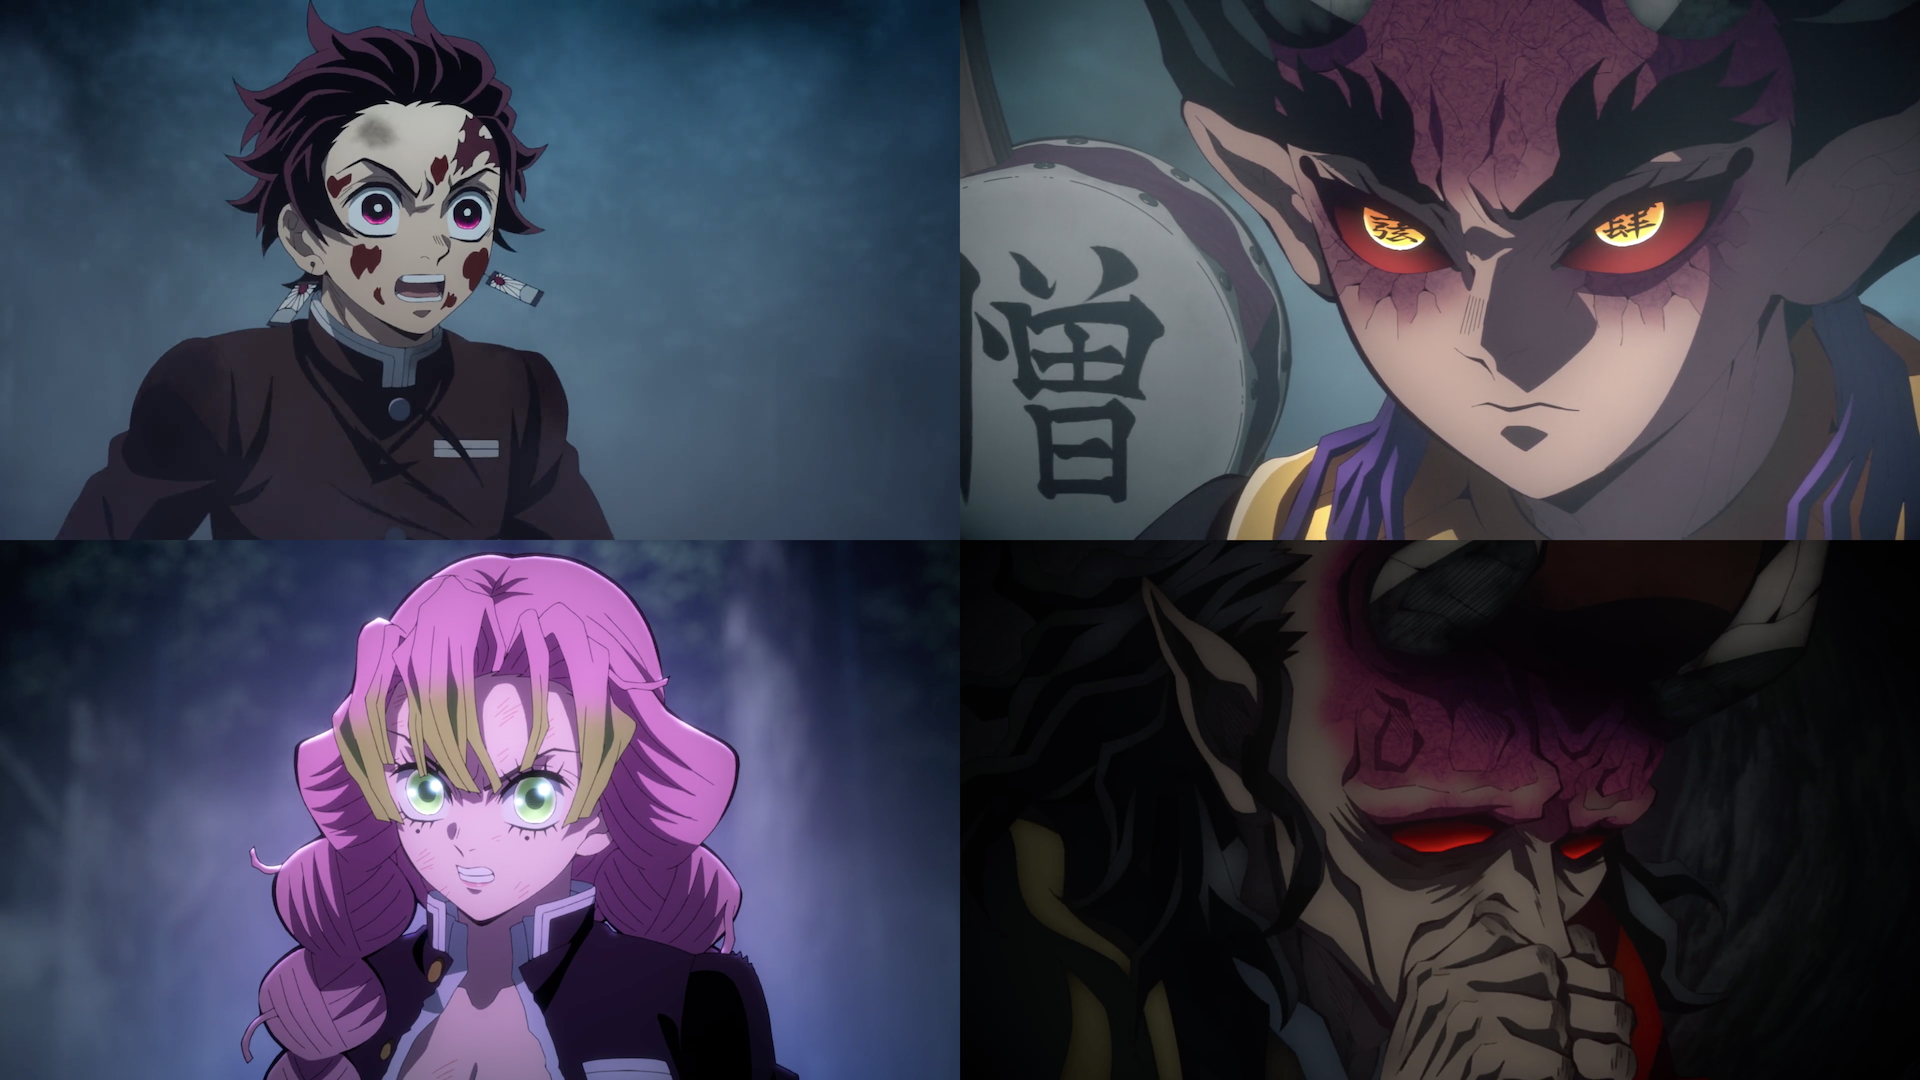 Episode 27  A look that flashes brilliance of Demon Slayer in hindi